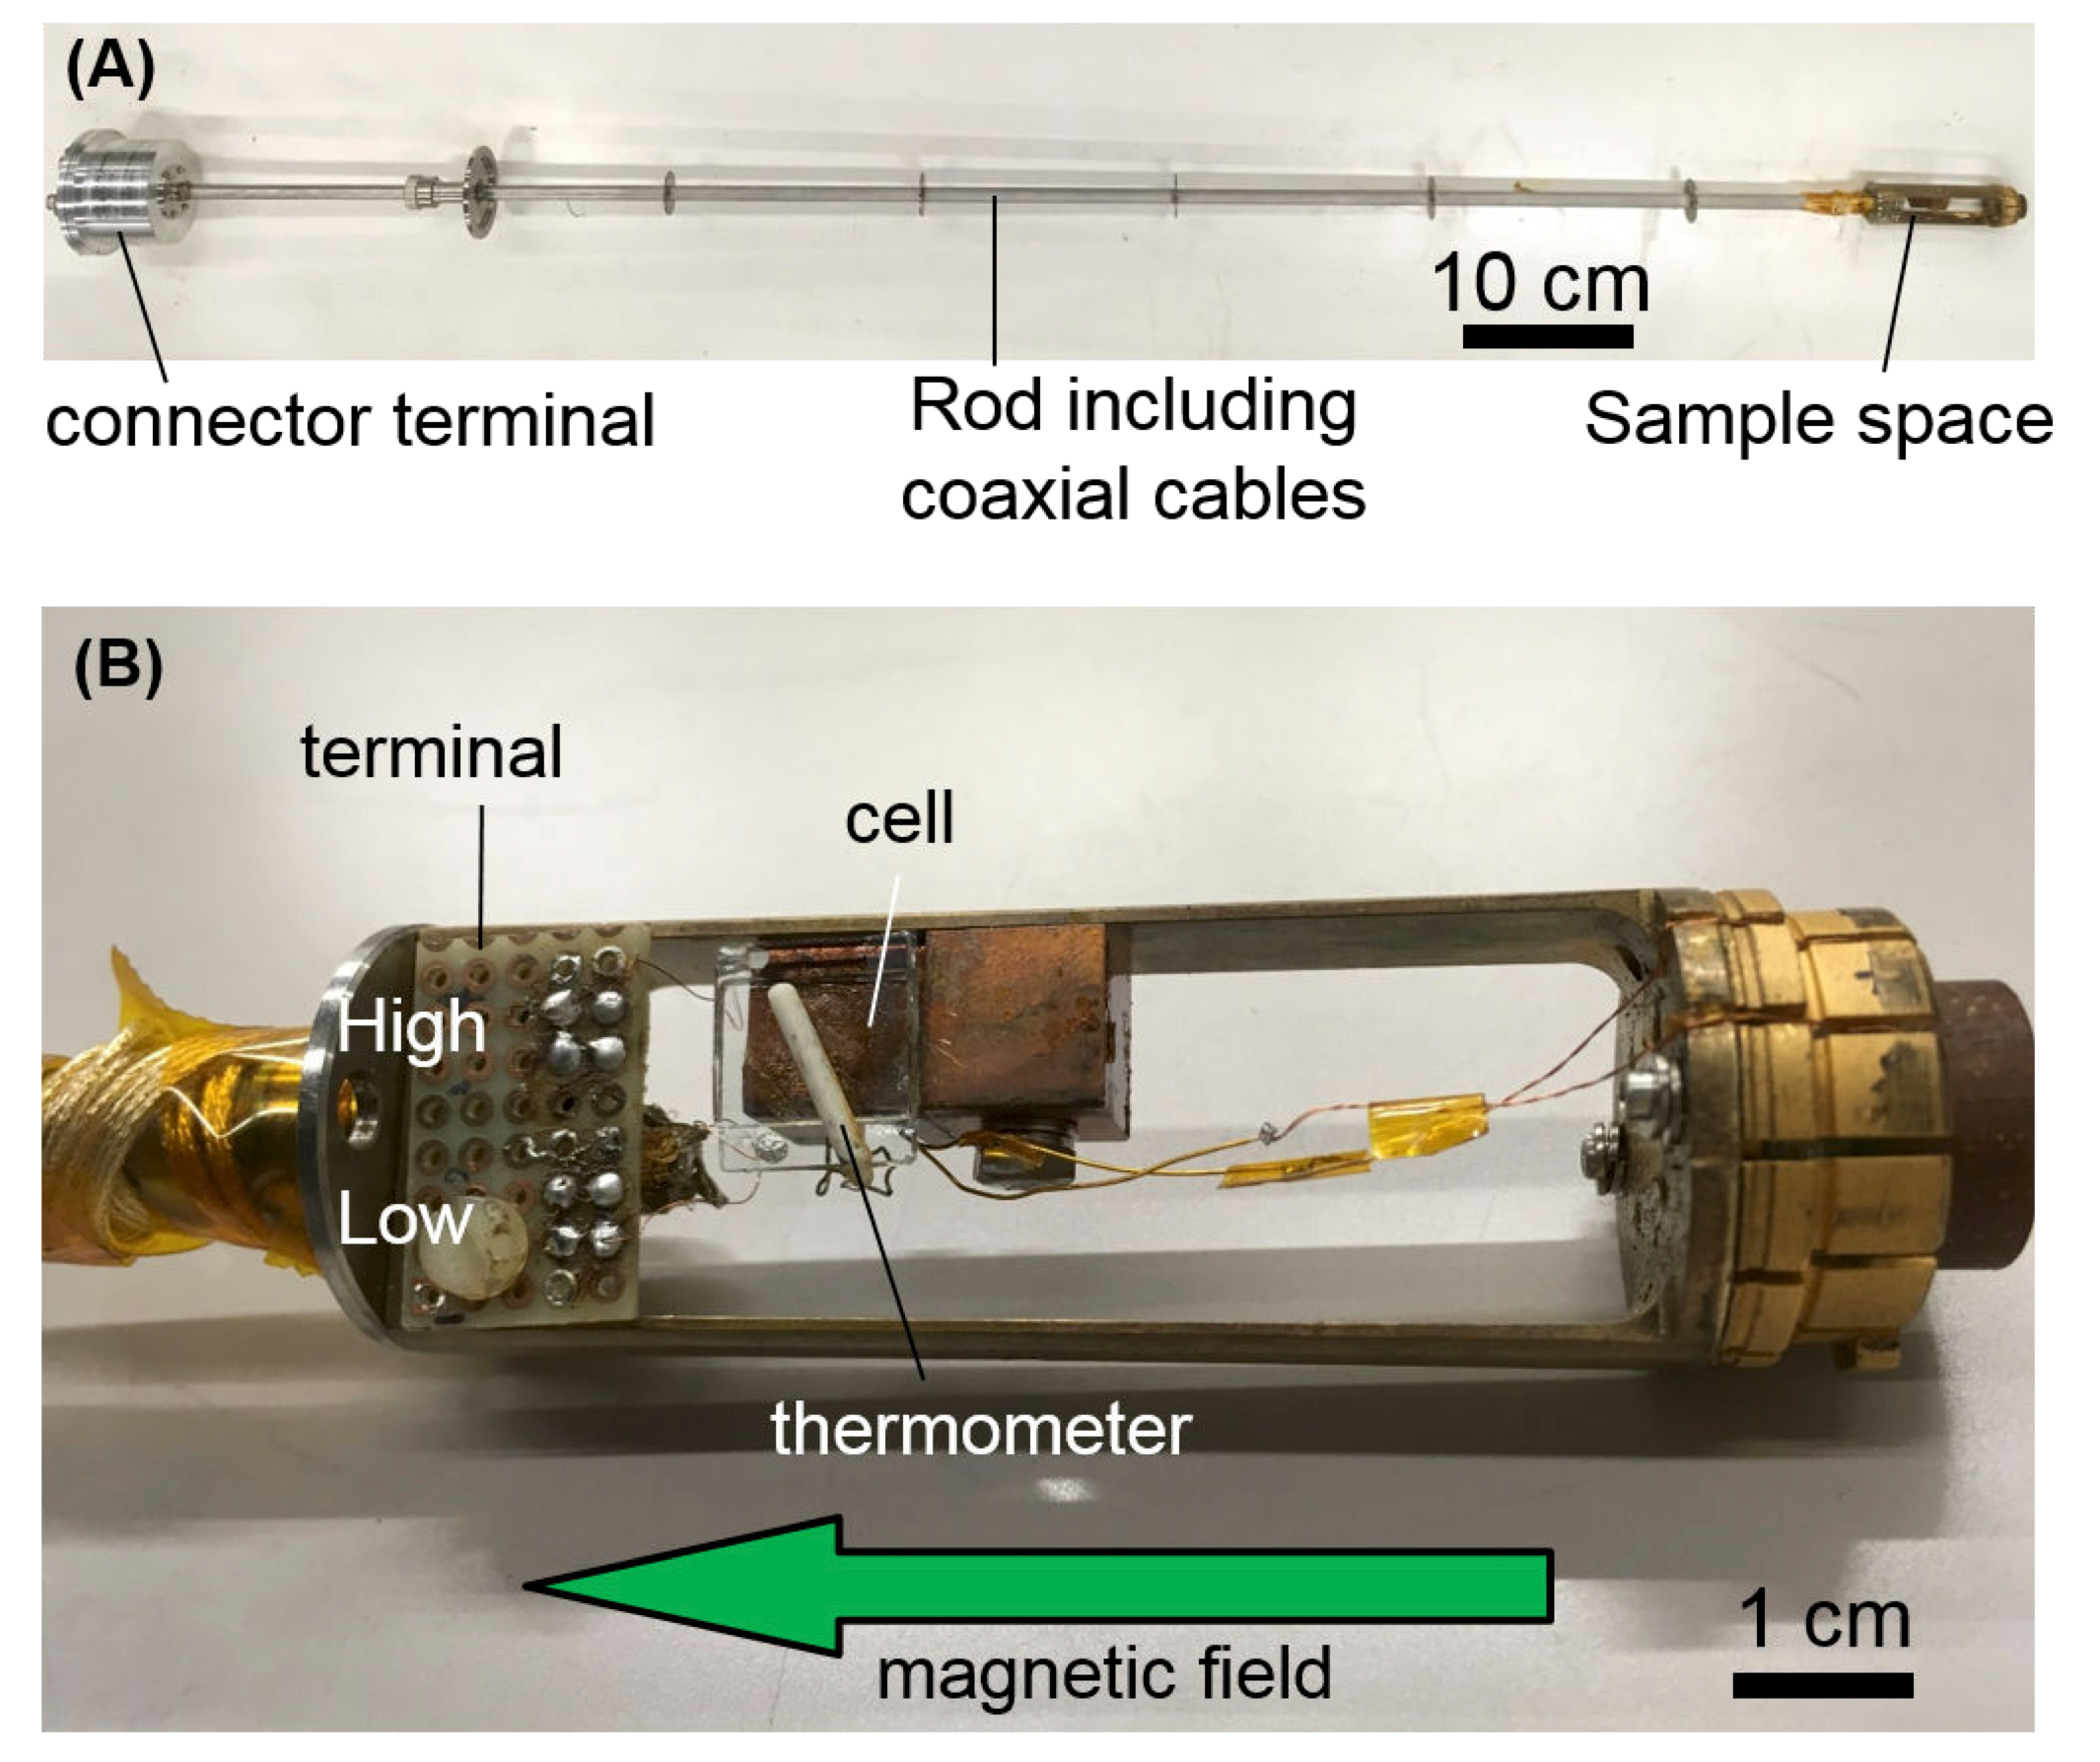 Measuring Magnetically-Tuned Ferroelectric Polarization in Liquid Crystals